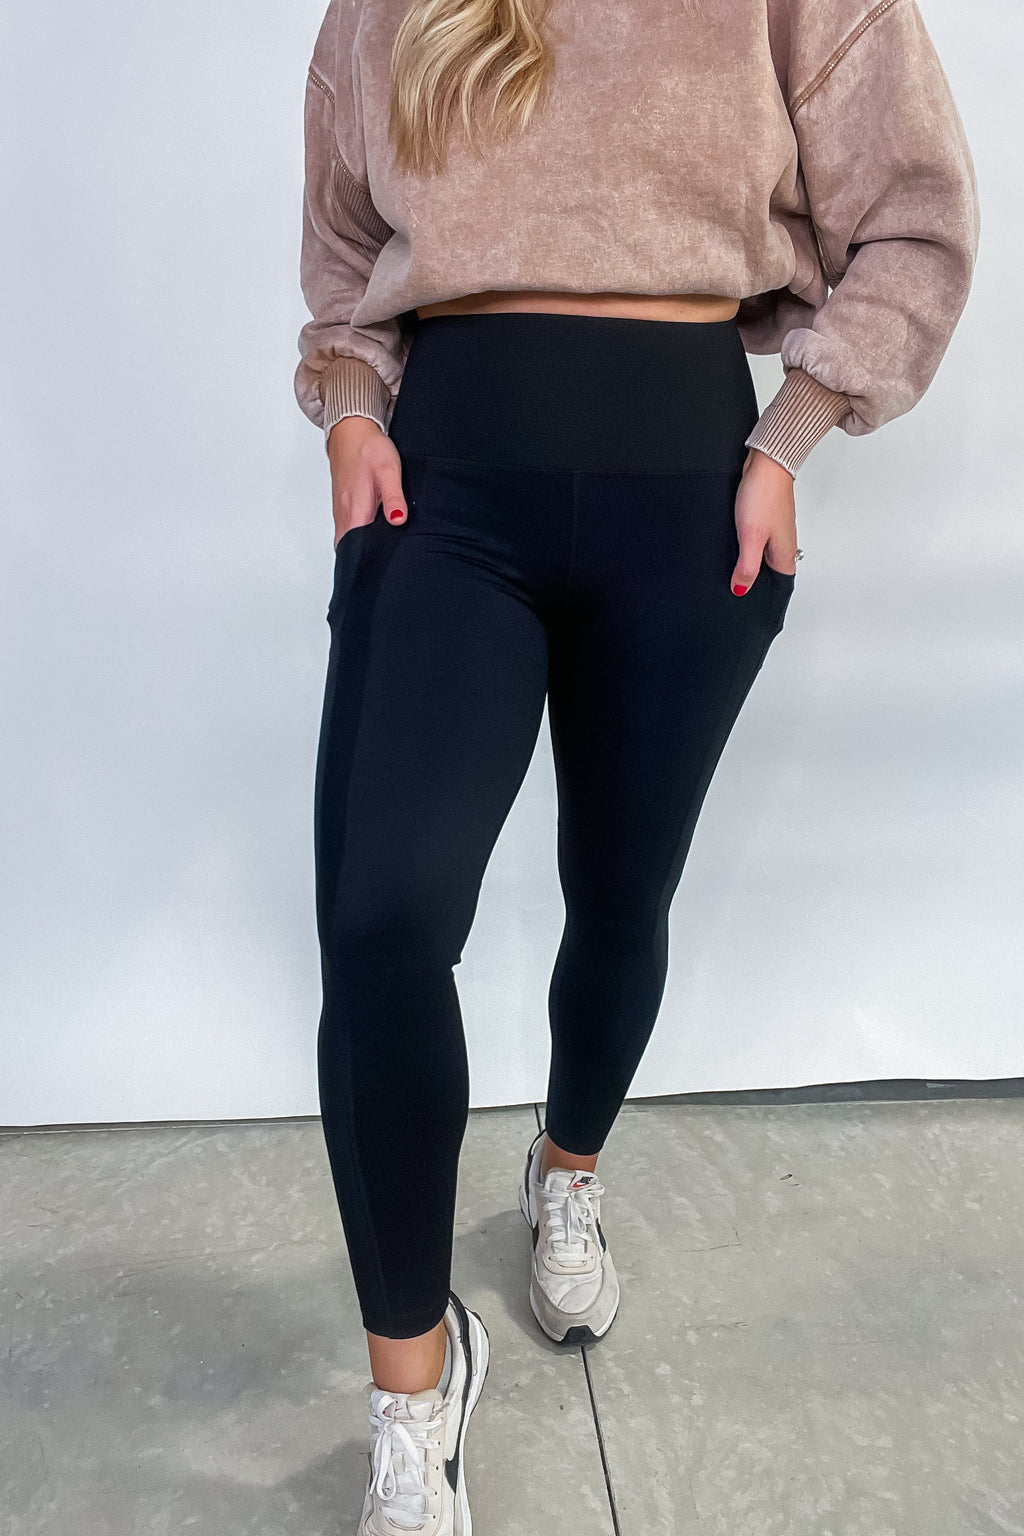 Gunna Want These- {Black & Navy} Buttery Soft Leggings – Proverbs Boutique